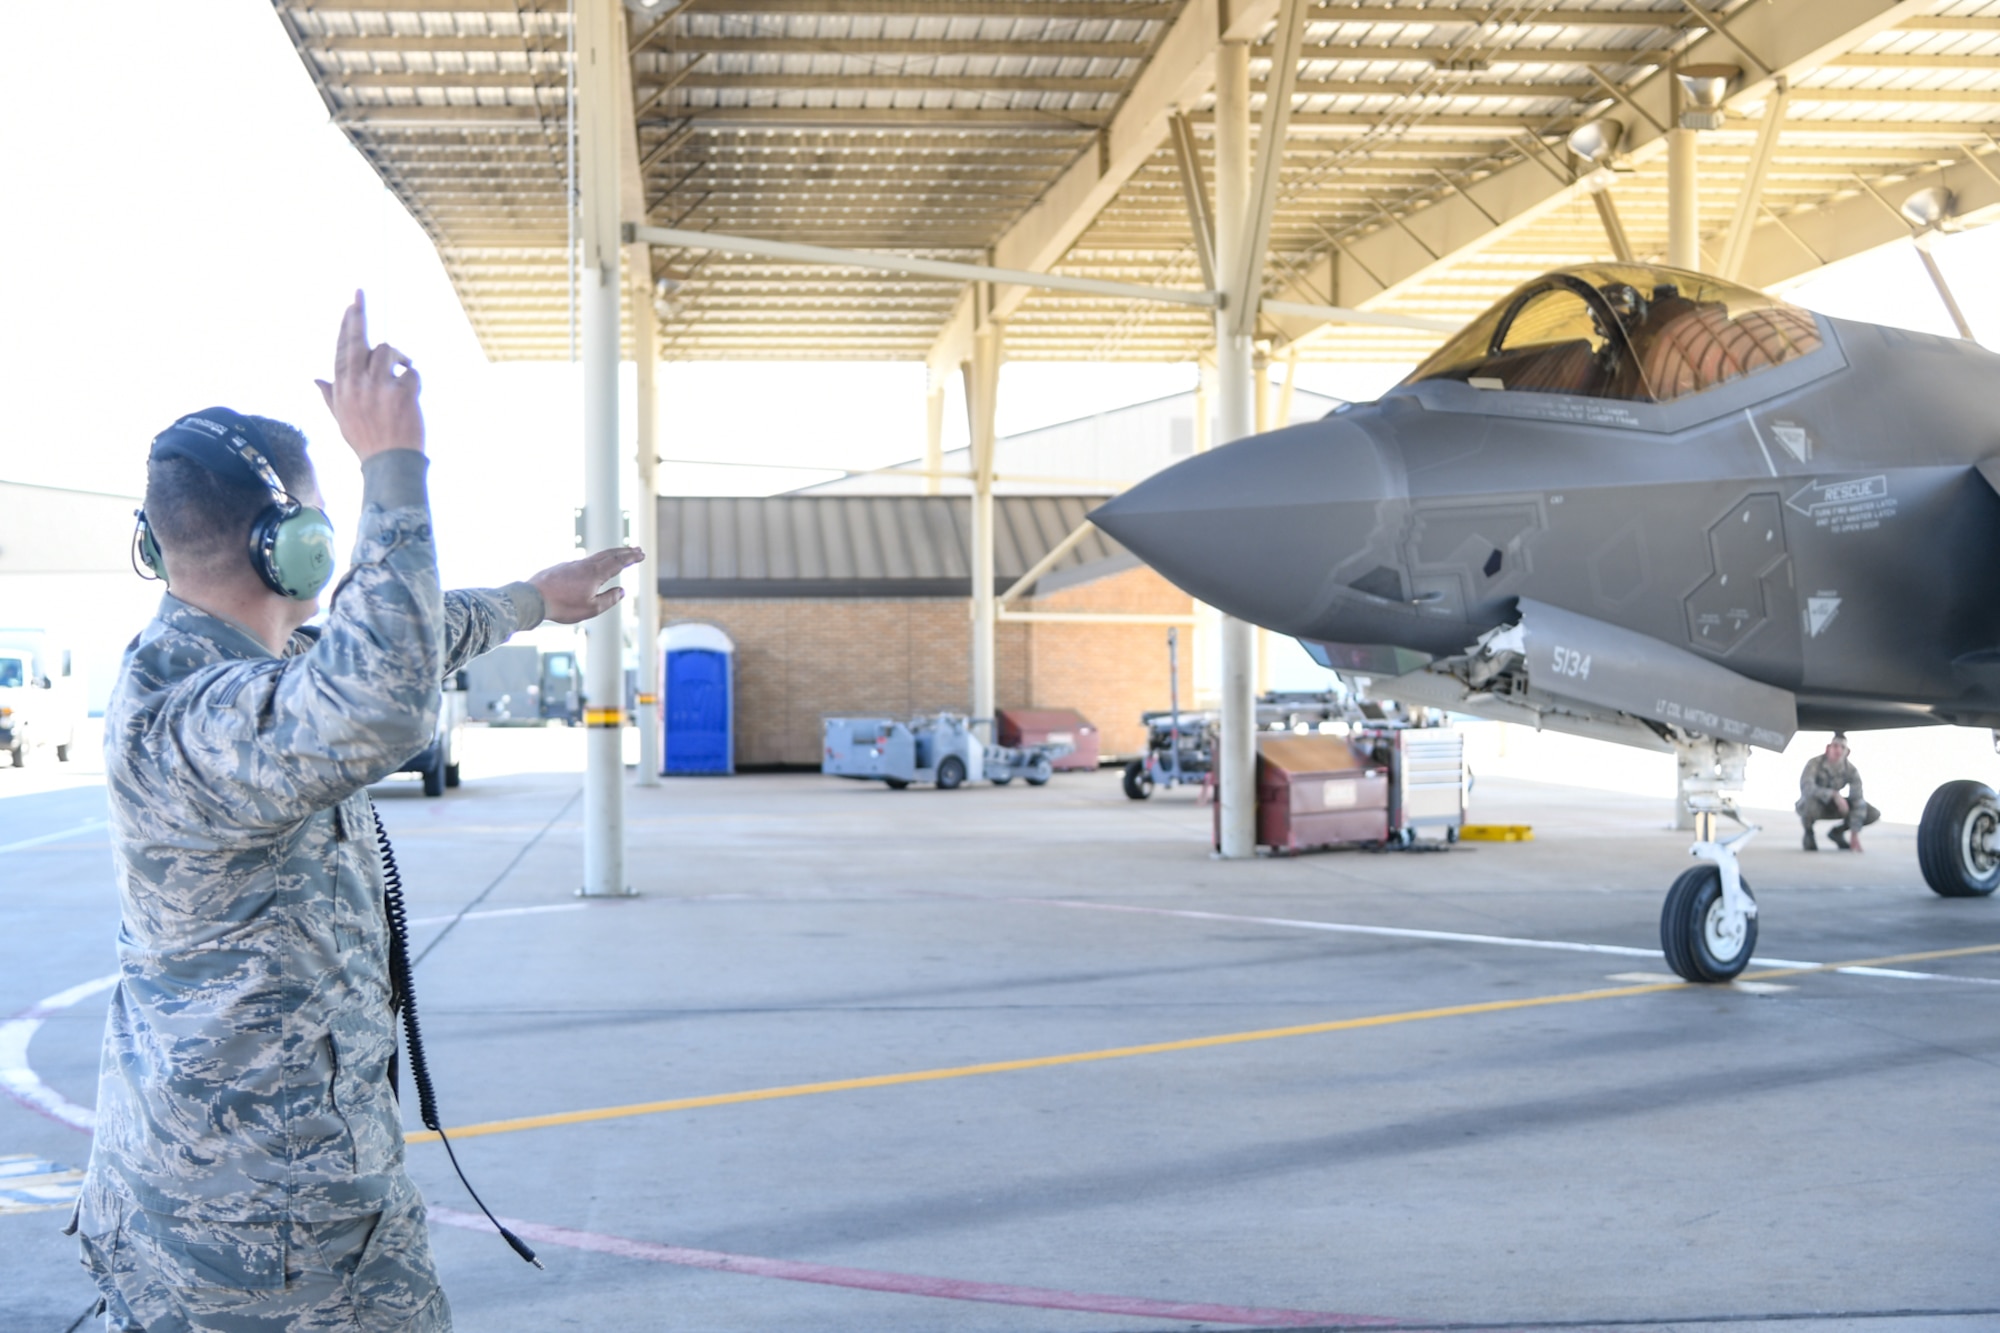 Staff Sgt. Brian Morrissey, 34th Fighter Squadron crew chief, prepares to send off an F-35A Lightning II piloted by Maj. Daniel Toftness, a reservist in the 419th Fighter Wing, Oct. 18, 2018, at Hill Air Force Base, Utah. The flight marked the 10,000th sortie with the aircraft at Hill since the first operational F-35s arrived in September 2015. (U.S. Air Force photo by Cynthia Griggs)